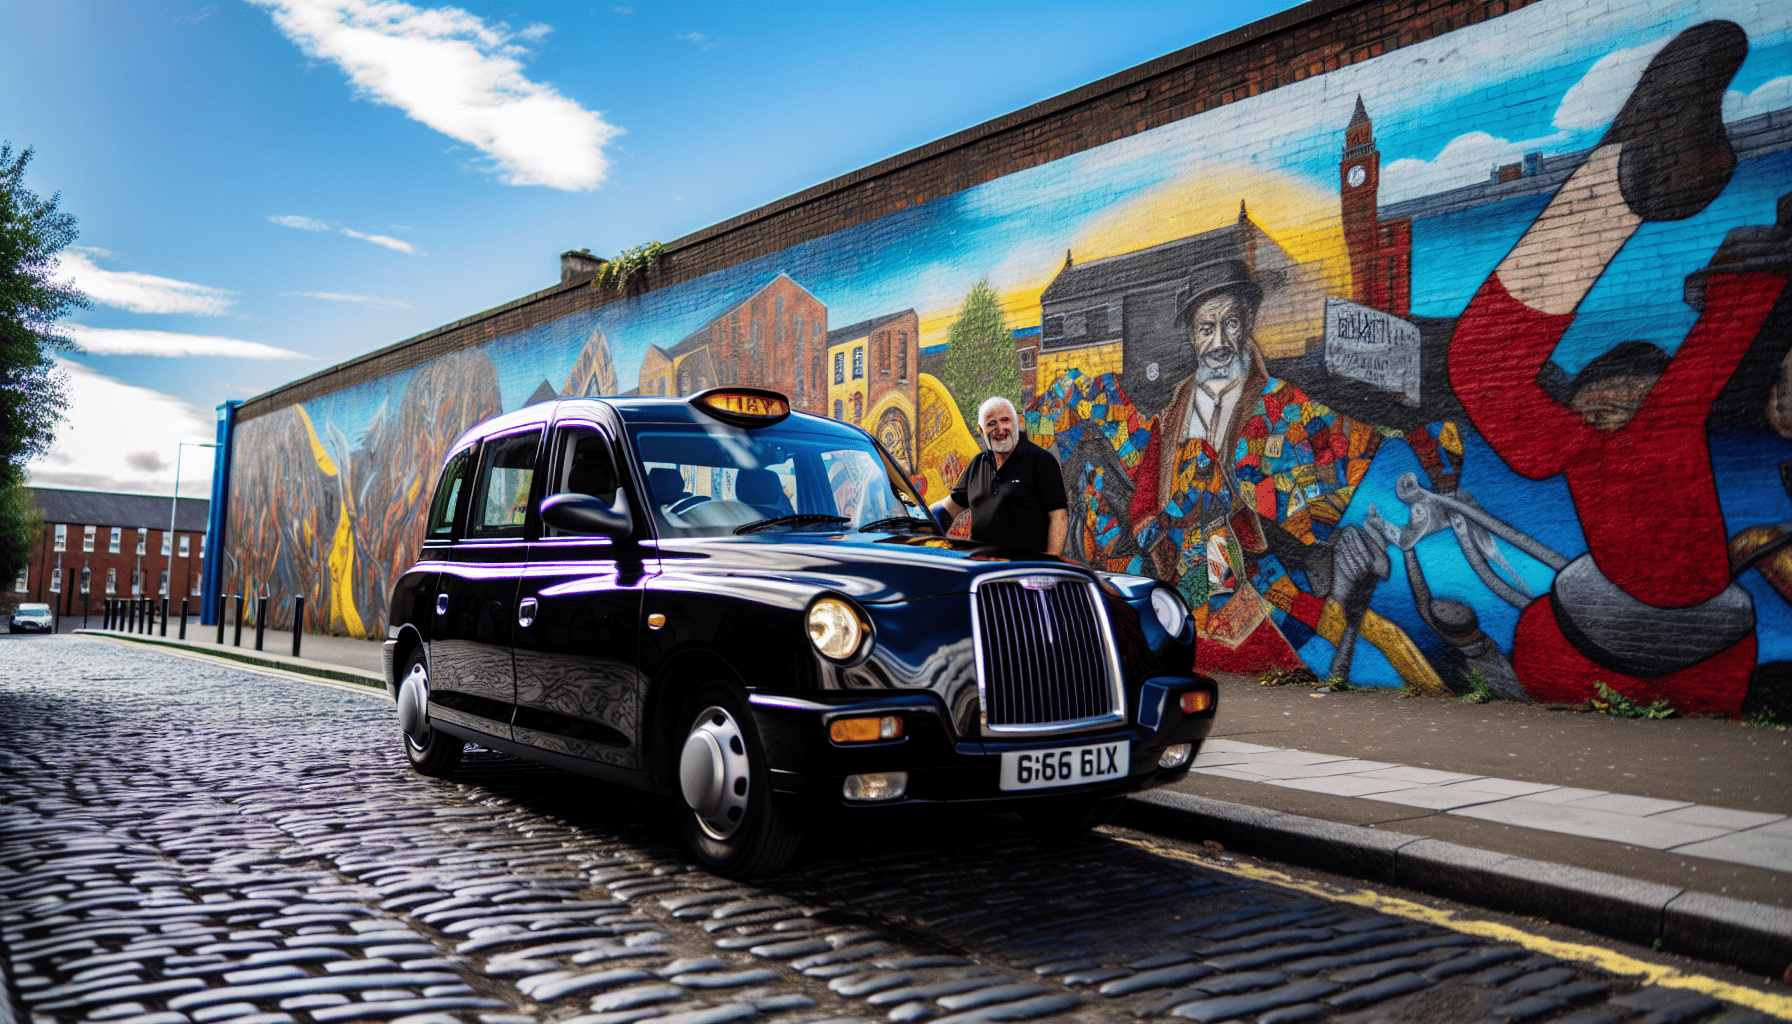 A black taxi parked in front of a colorful mural in Belfast